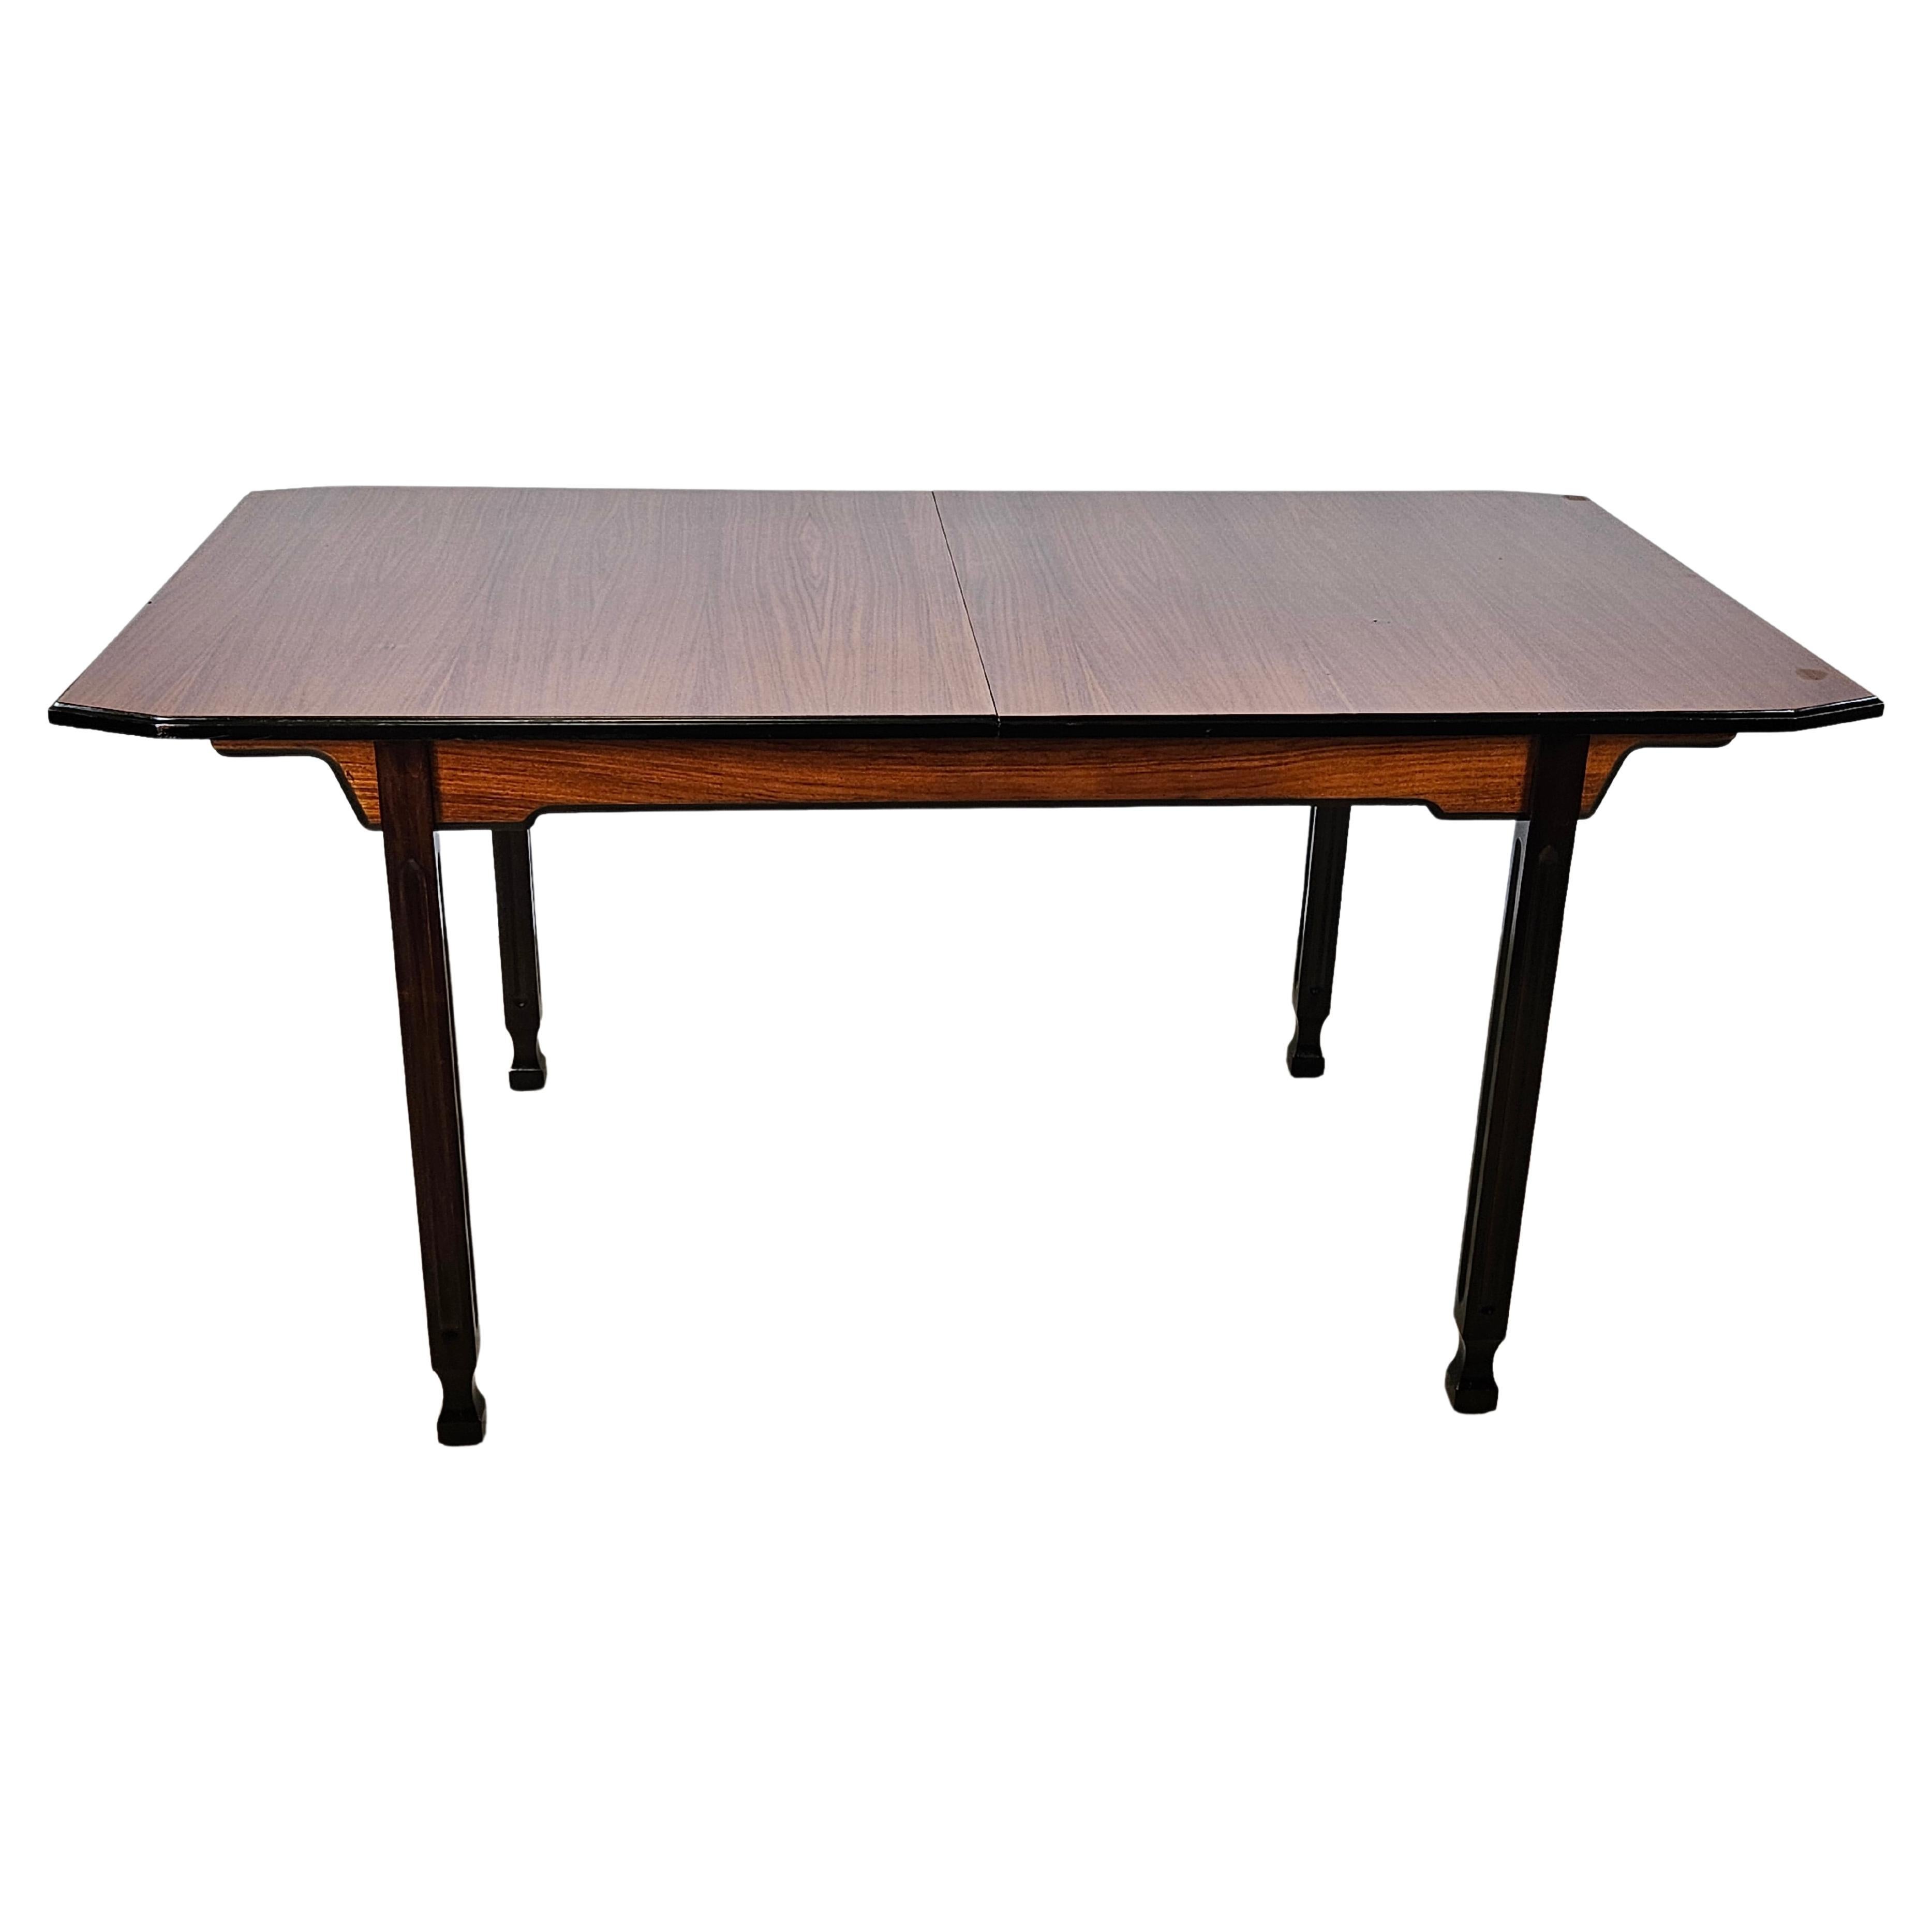 Scandinavian style extending dining table in walnut and ebony For Sale